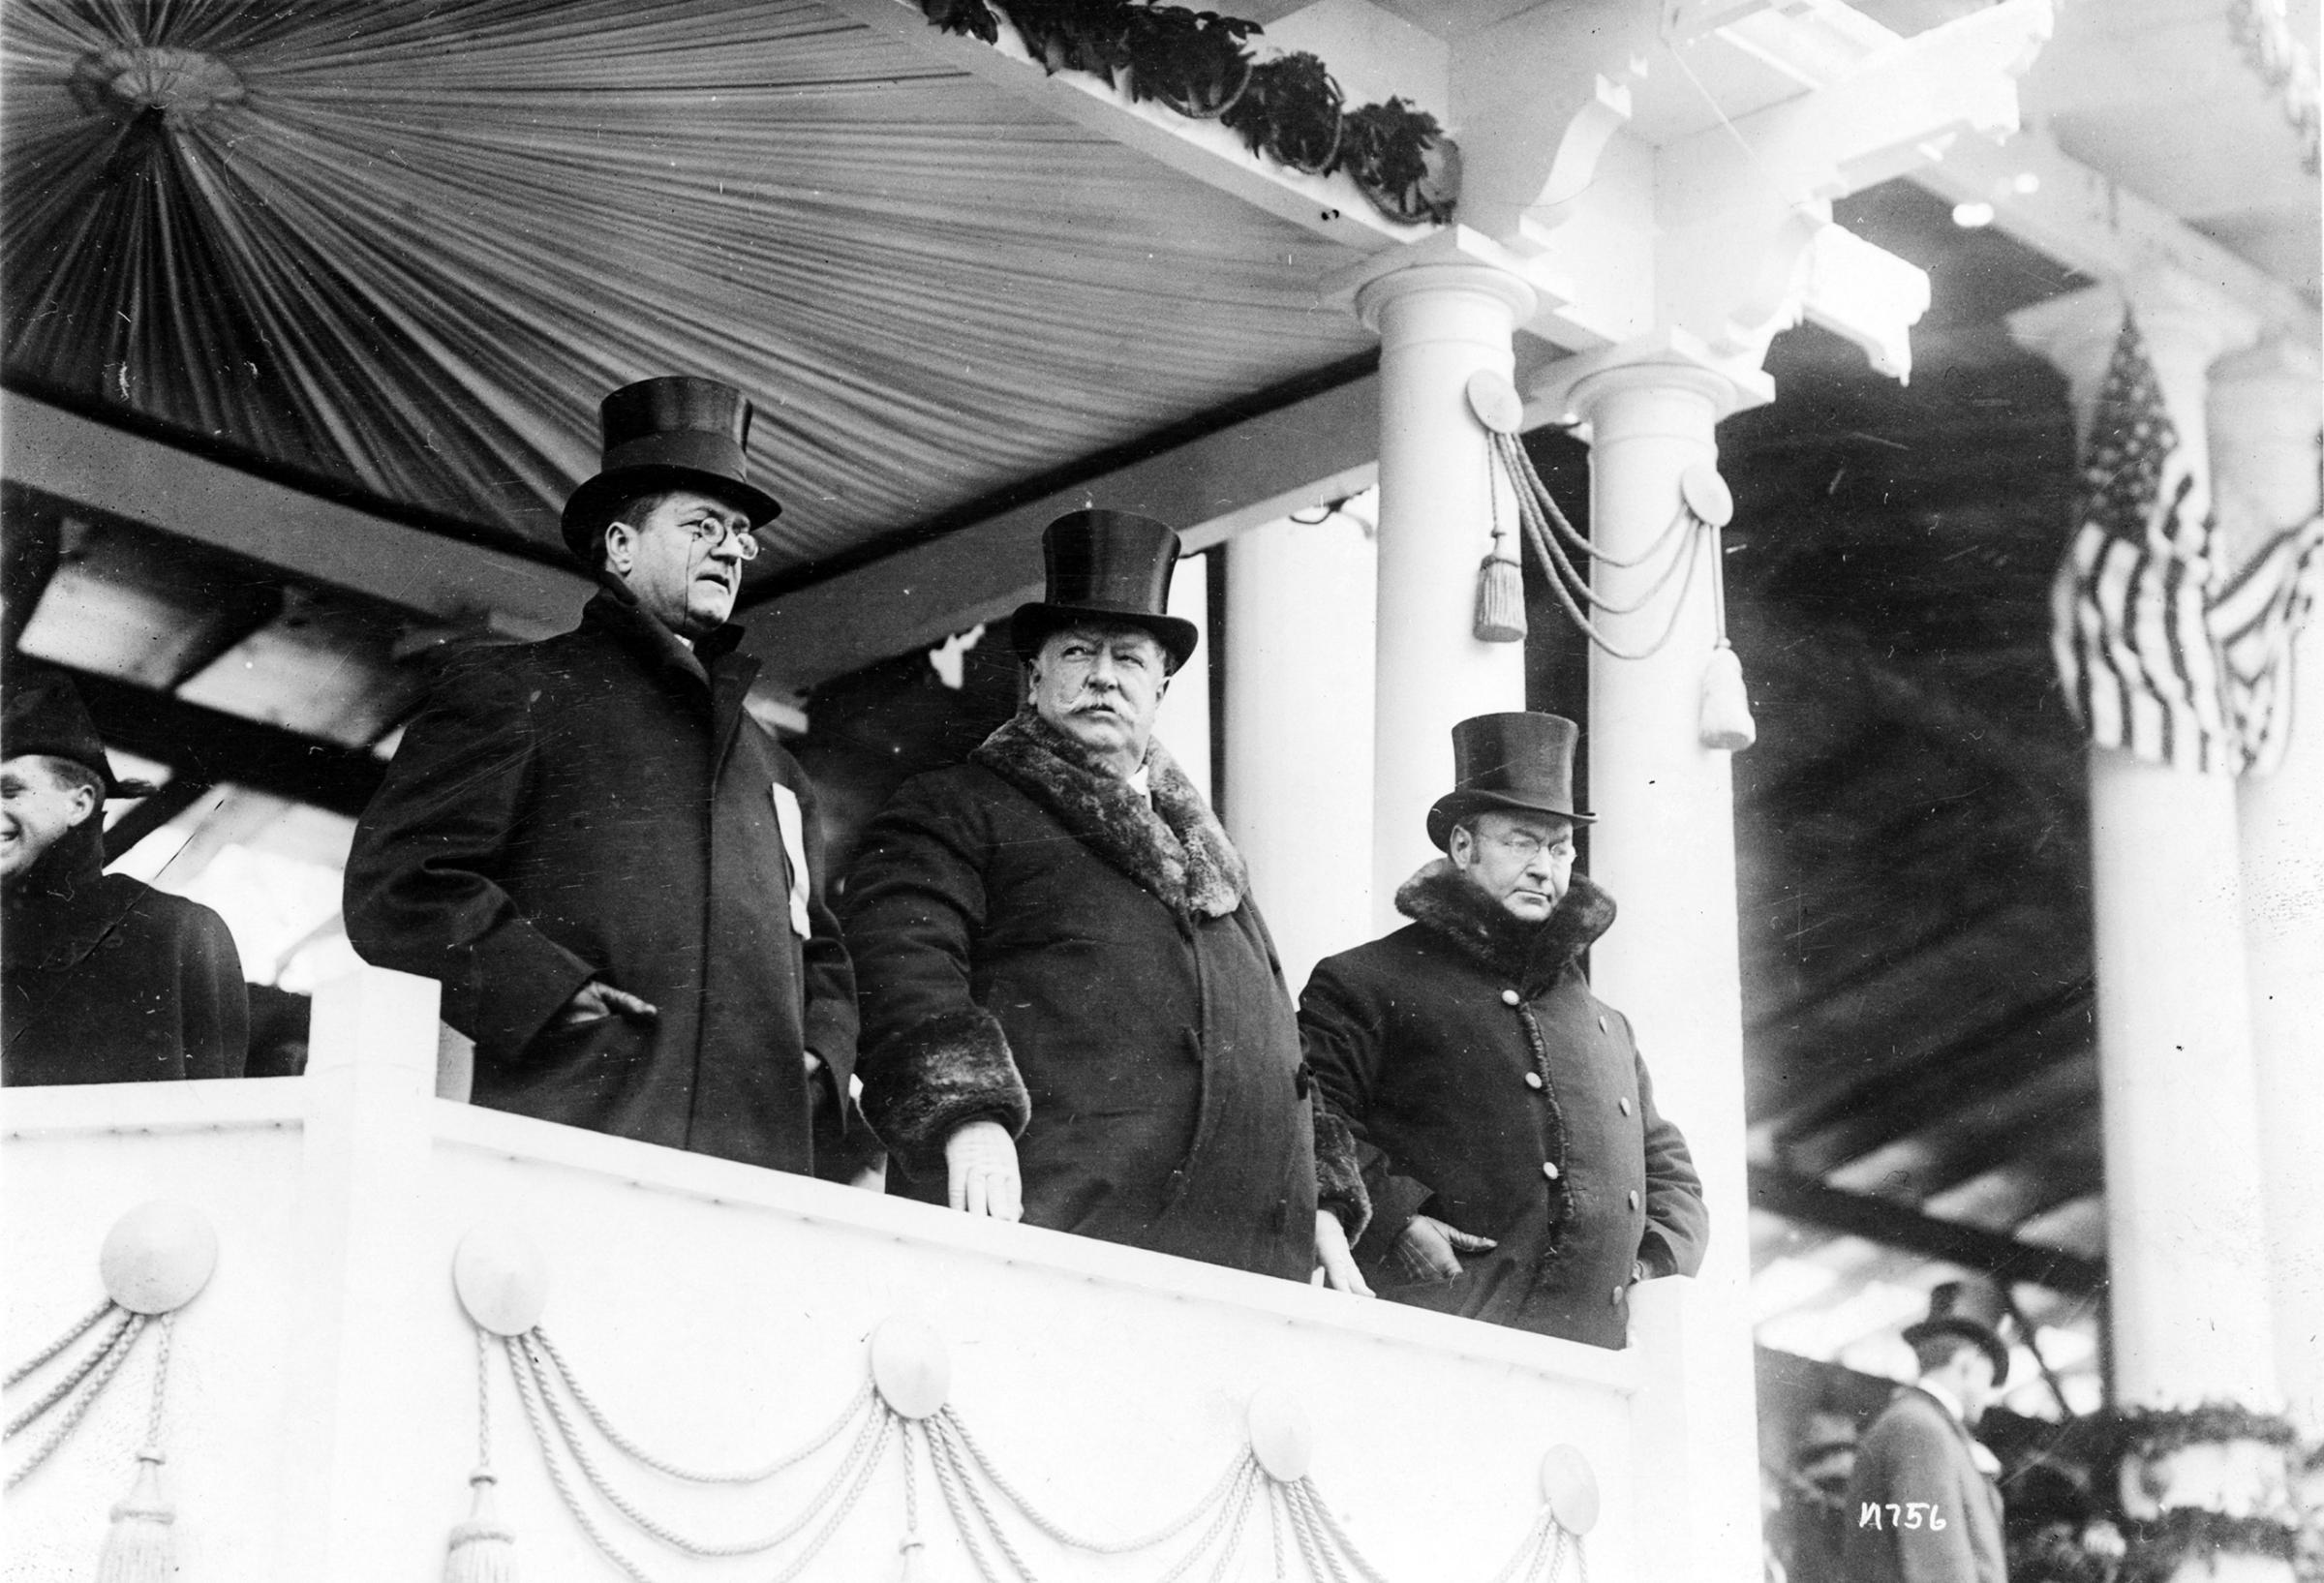 William Howard Taft with Edward F. Stallwagon, Chief of the Inaugural Committee, and with Vice President James S. Sherman. A severe blizzard hindered the inaugural ceremonies, 1909.